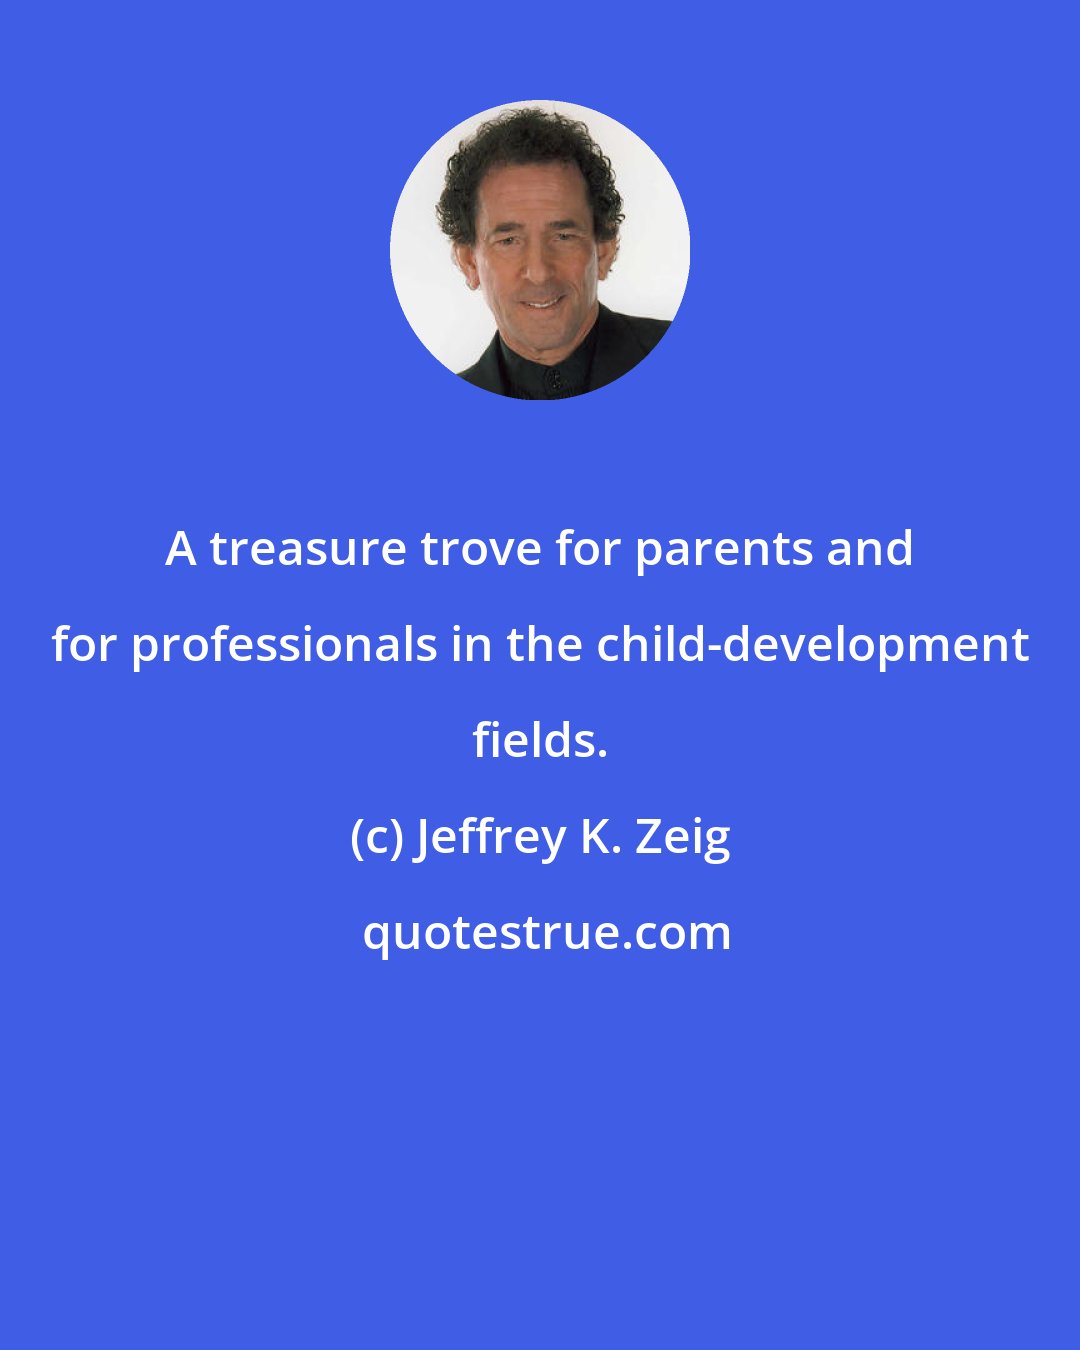 Jeffrey K. Zeig: A treasure trove for parents and for professionals in the child-development fields.